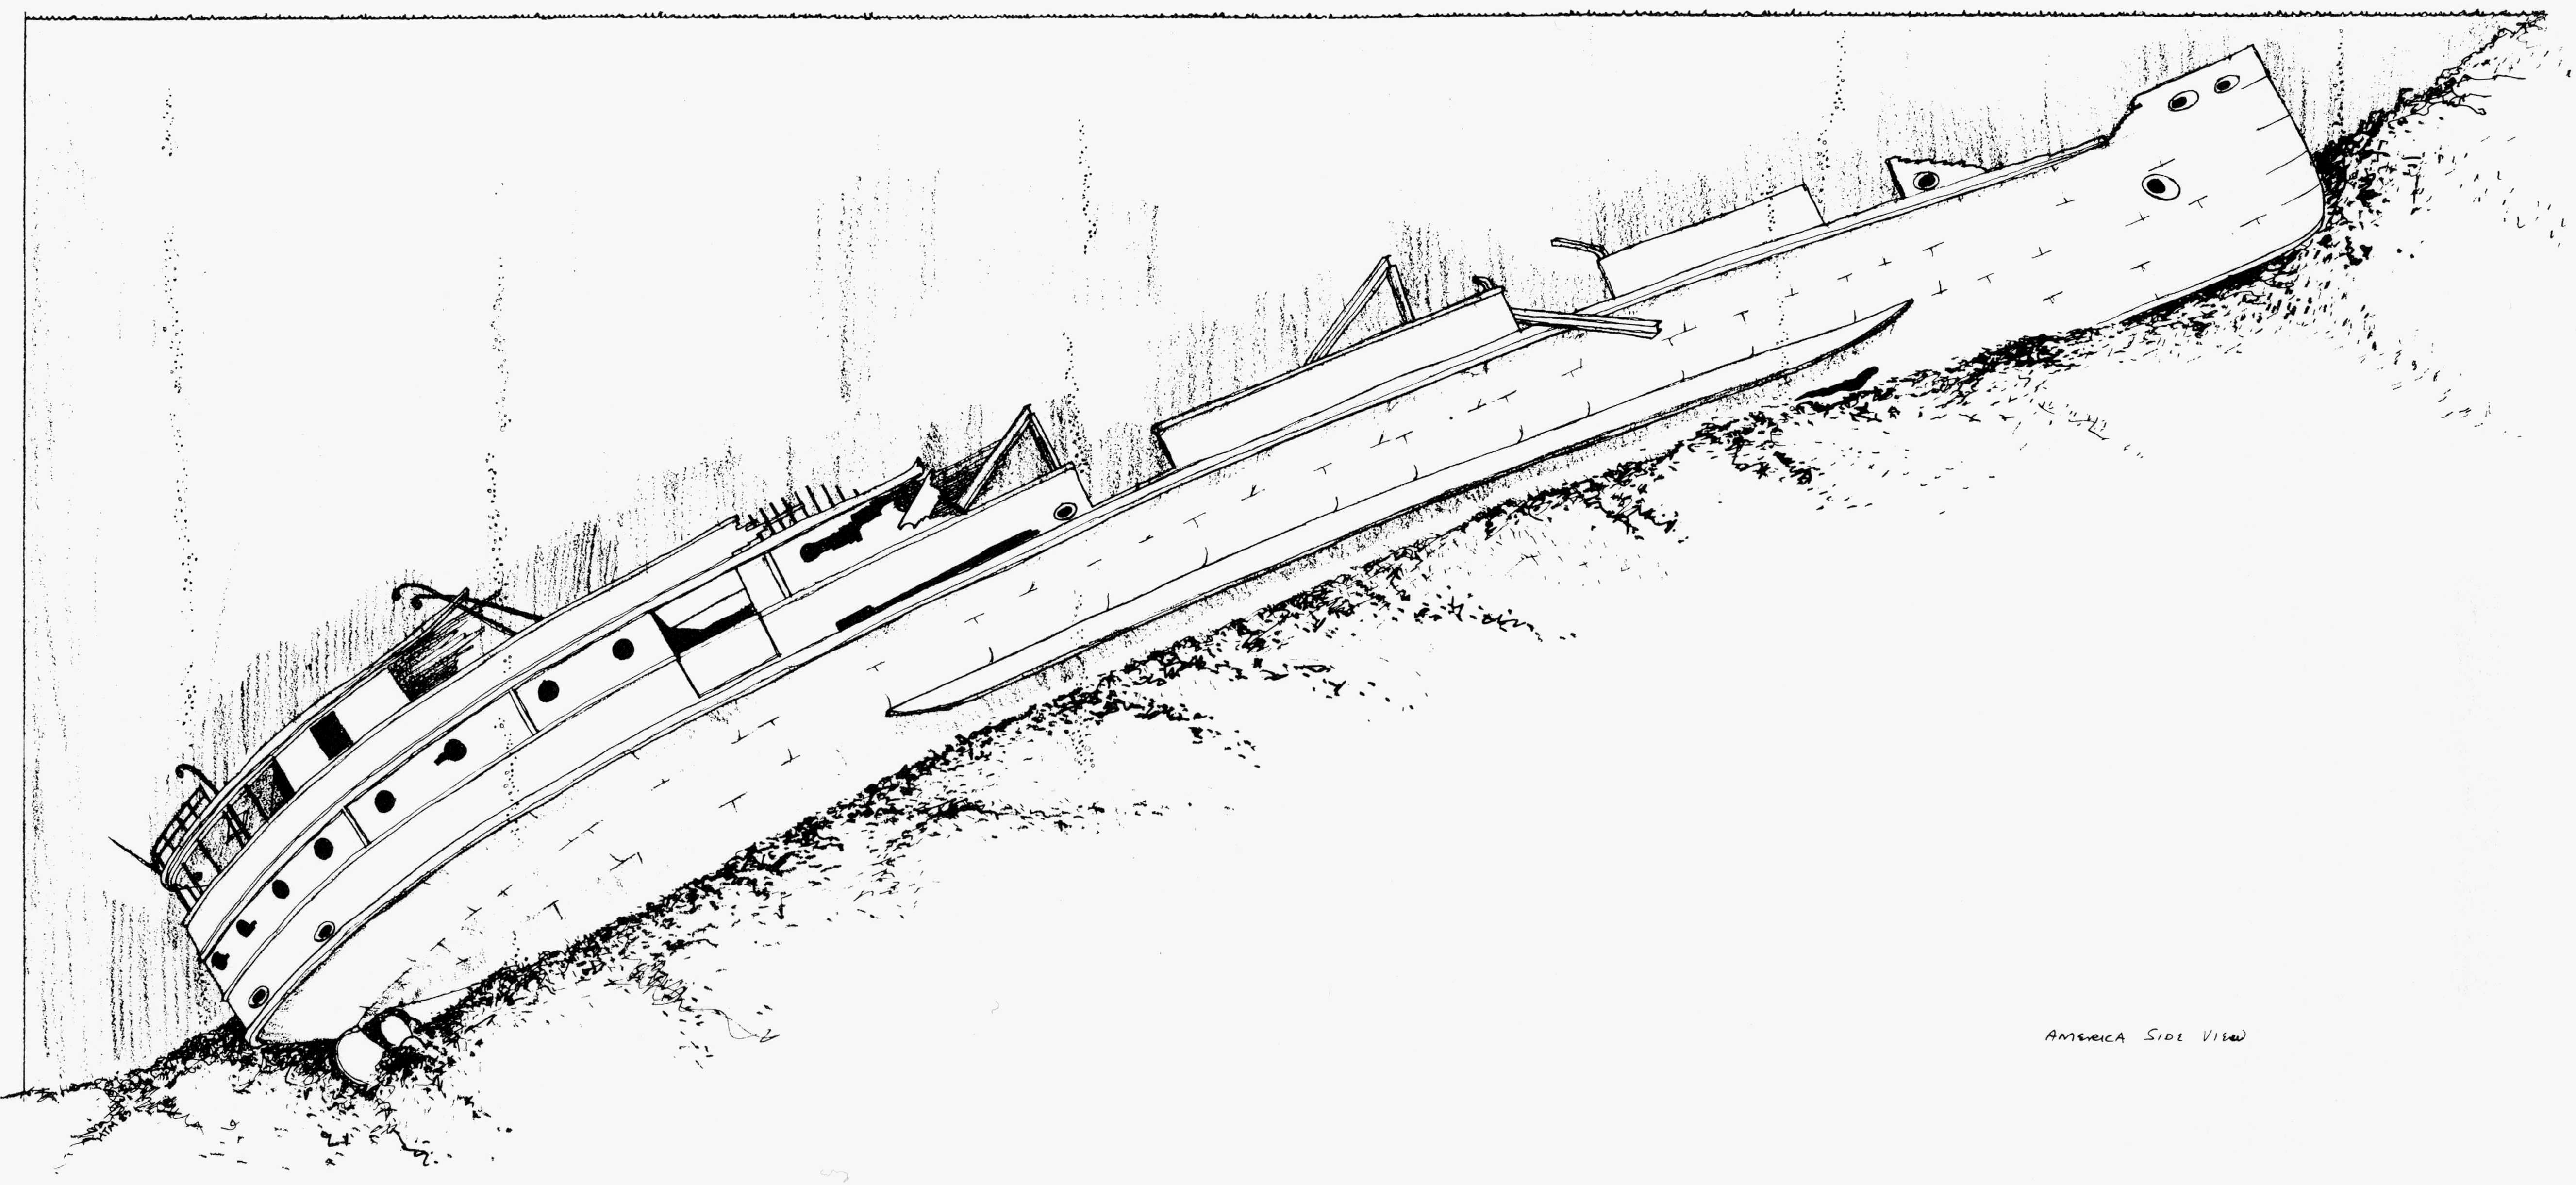 side sketch of the America shipwreck